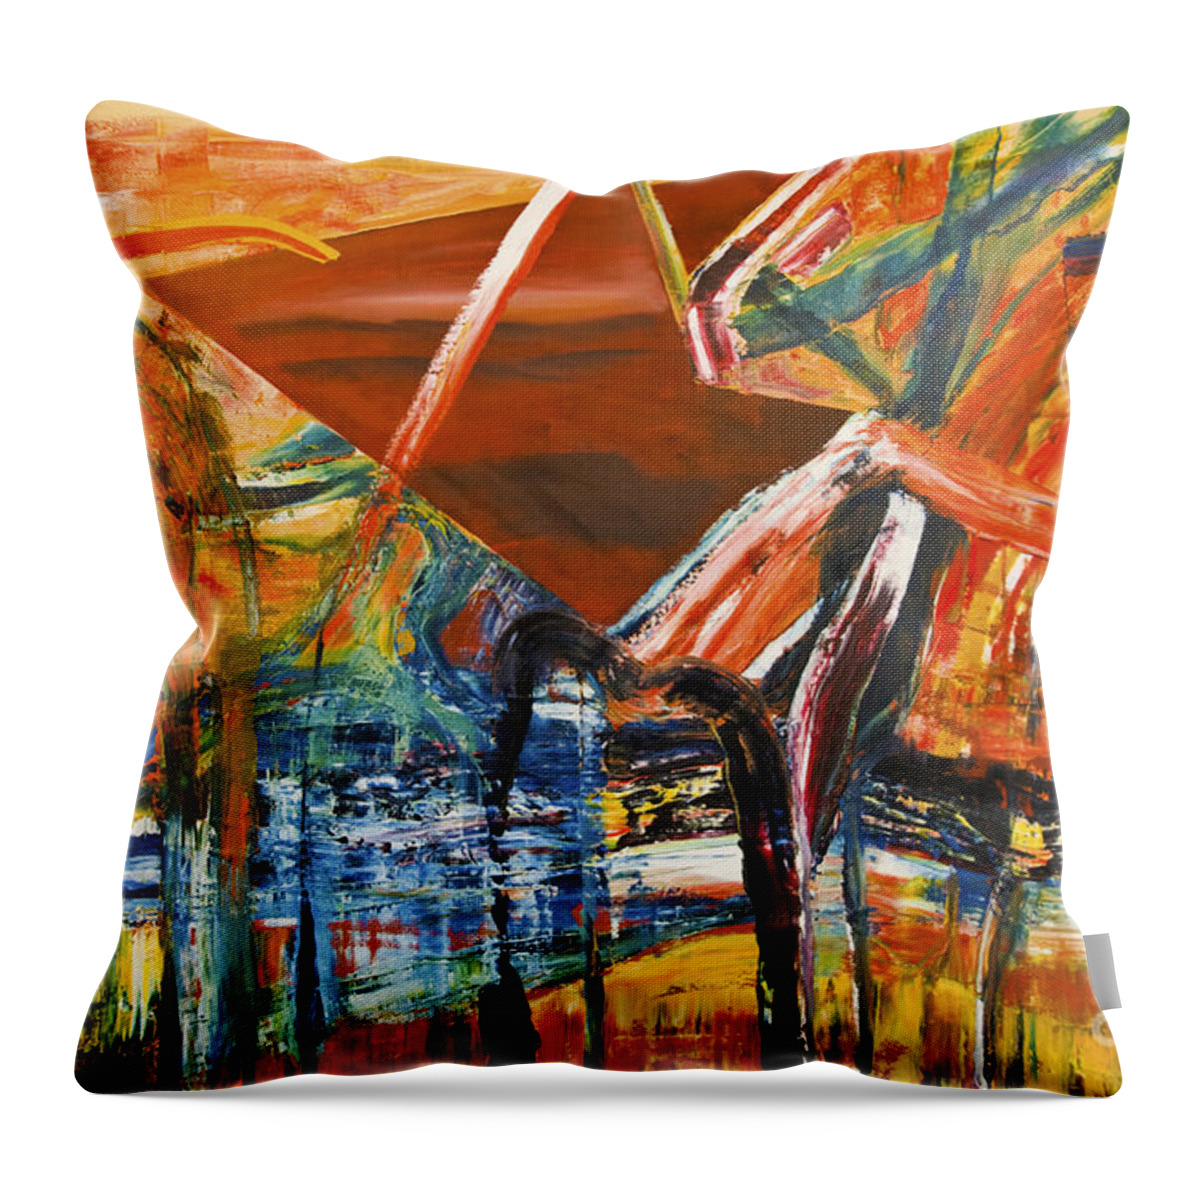 Undergrowth Throw Pillow featuring the painting Undergrowth V by James Lavott